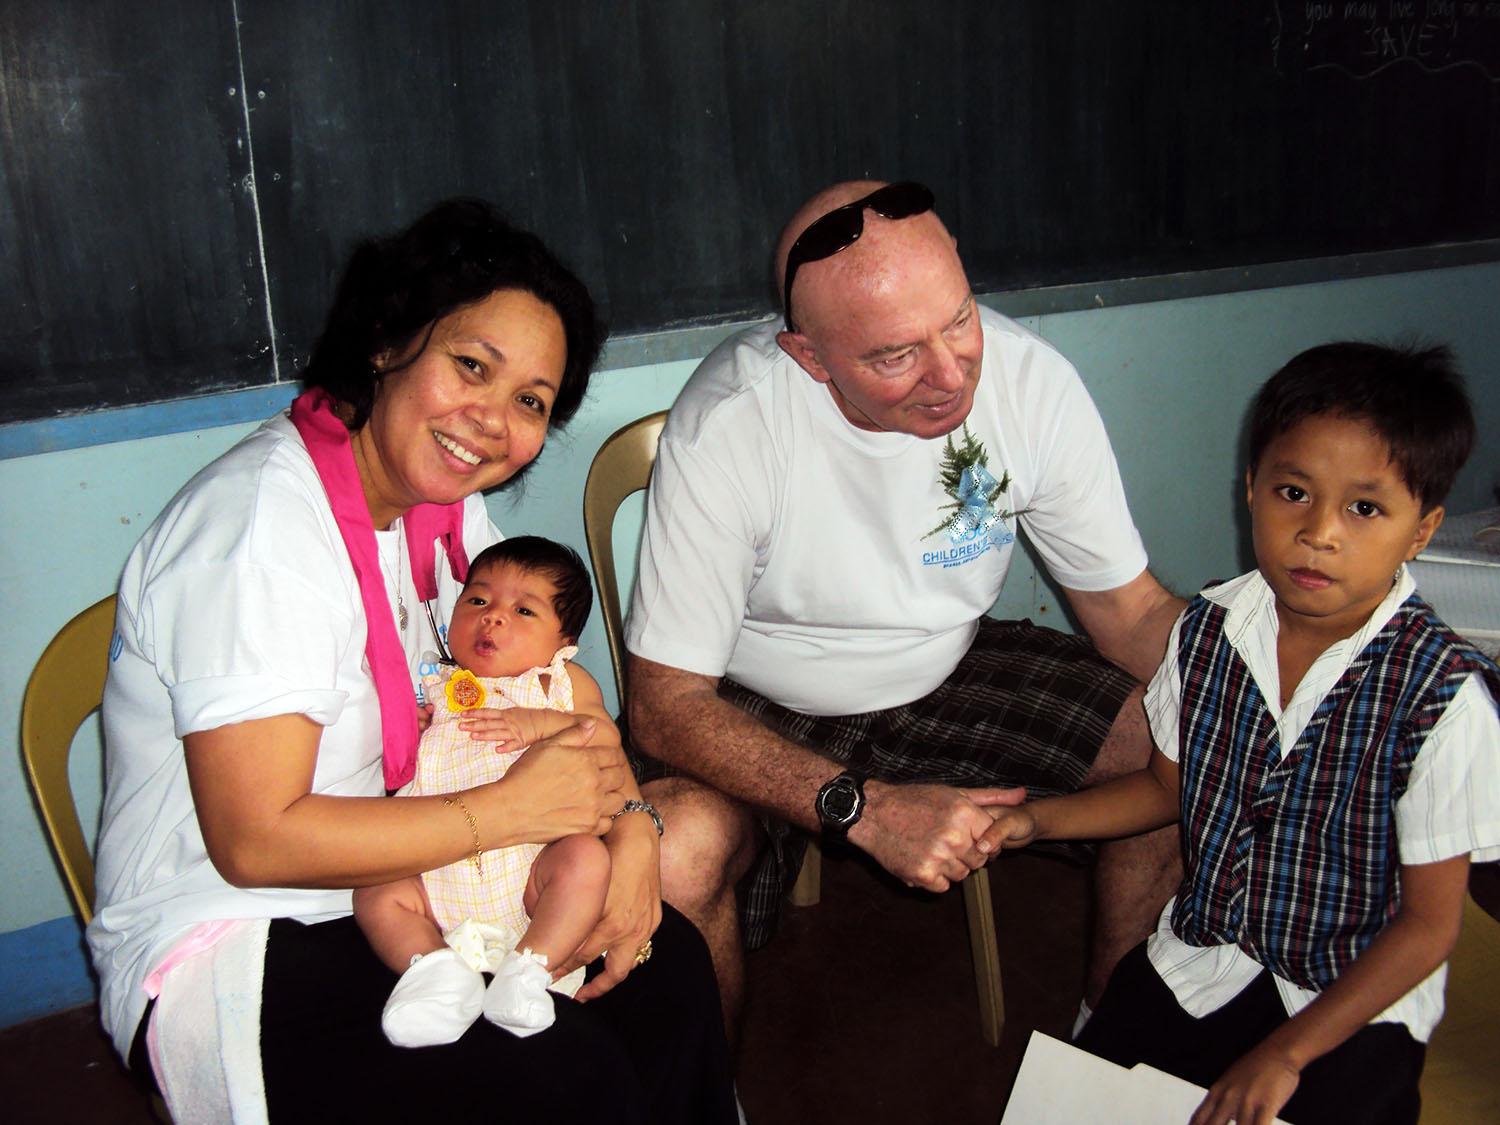 Beth and Irv Silver, from Orlando US, visit their sponsored child in Bacolod, Philippines